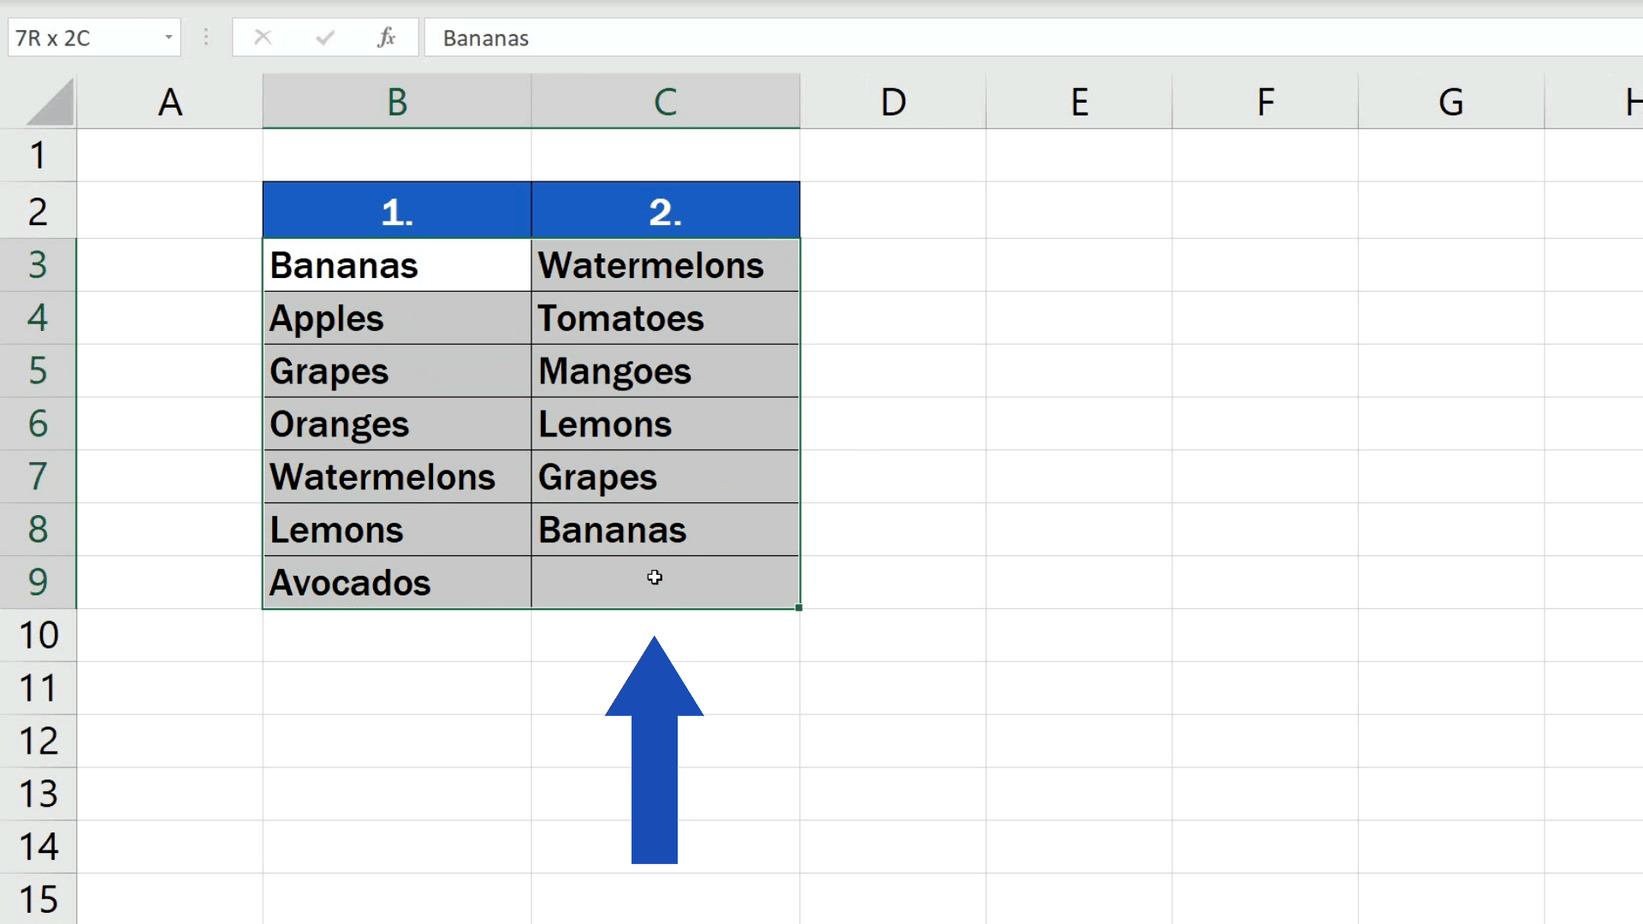 how to find difference between two column values in excel